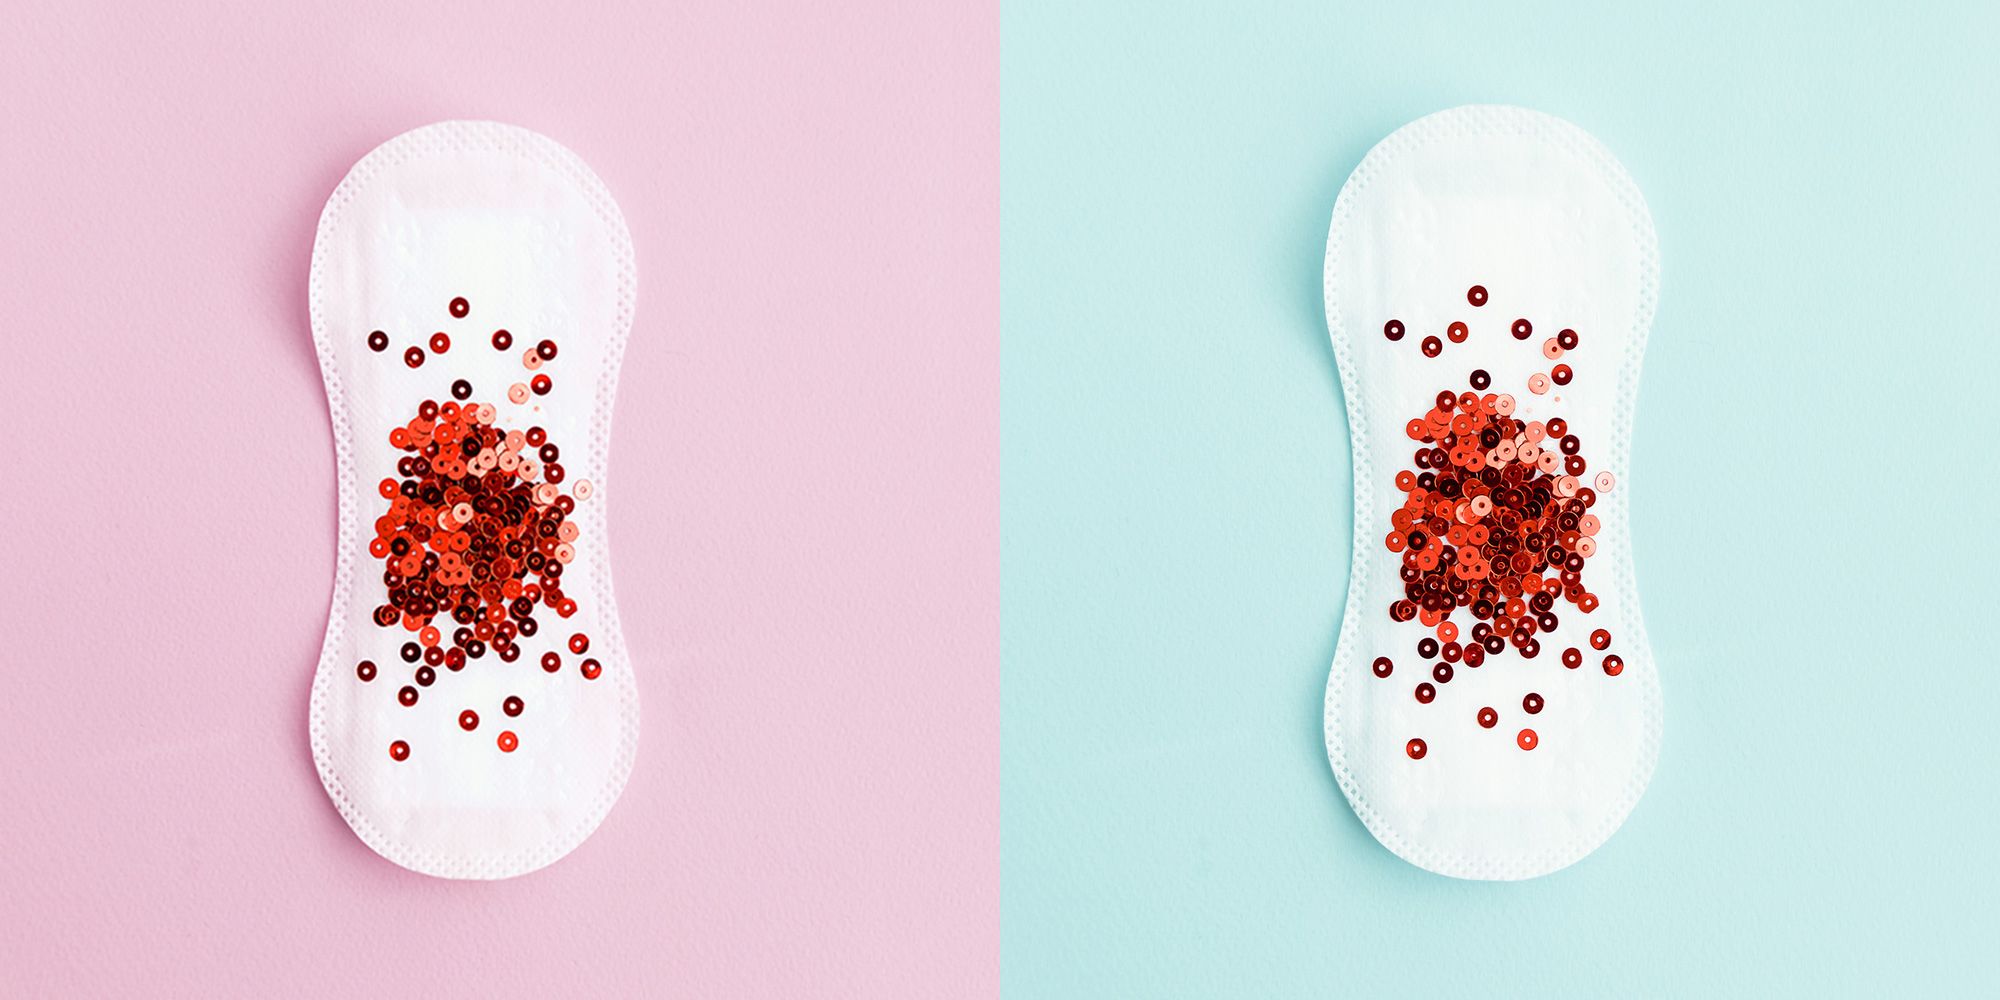 Heavy periods: 8 reasons your period is very heavy